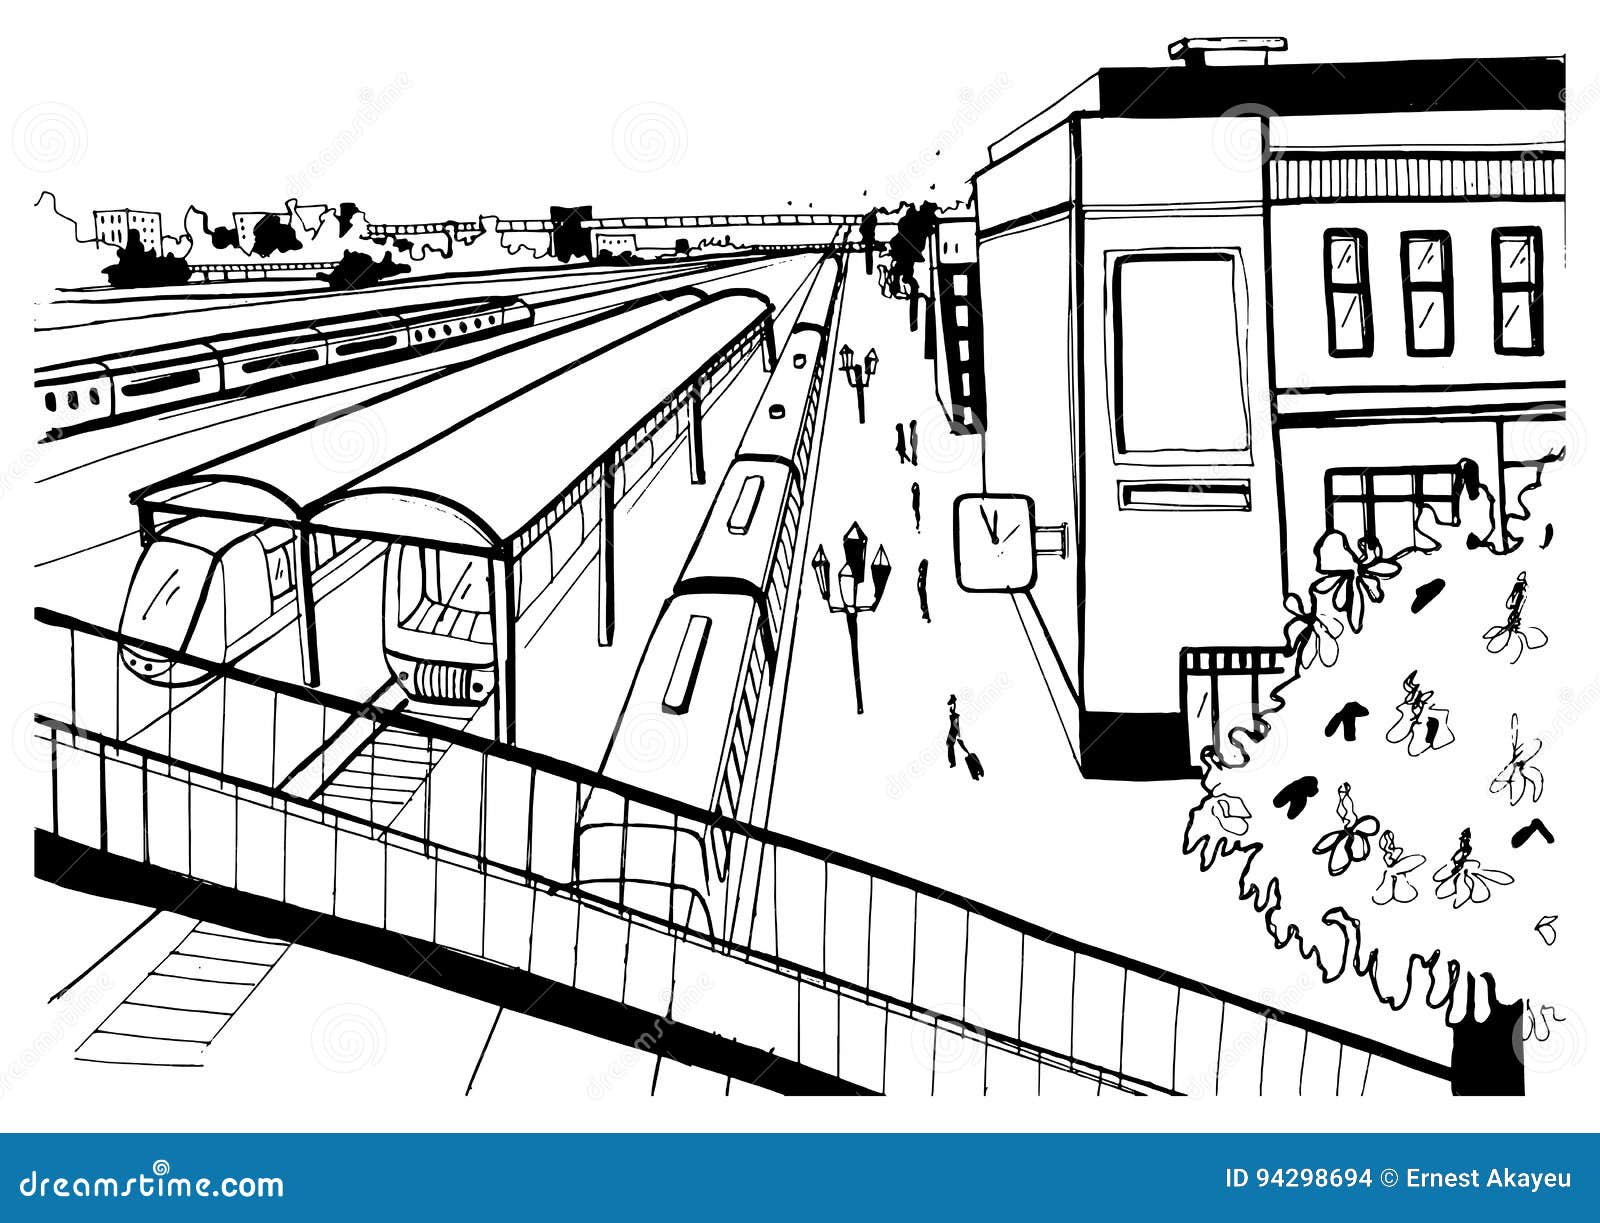 Station Sketch  Perspective art Linear perspective drawing Perspective  drawing architecture